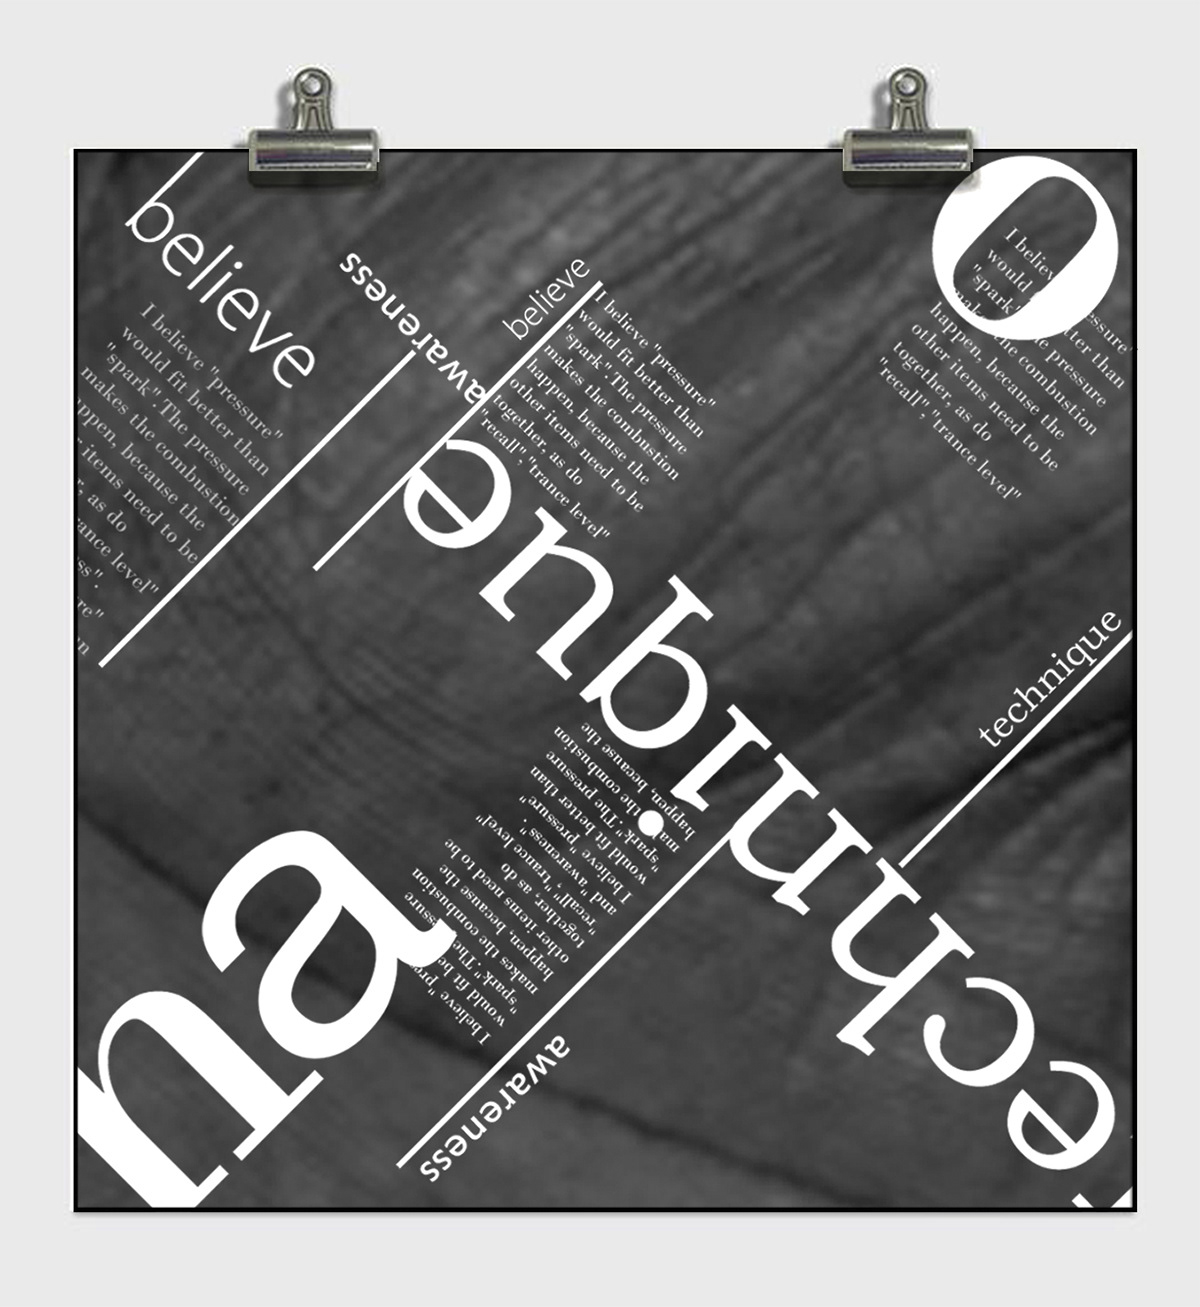 compositions typography   letters nighbo neighbourhood graphic design   awake black White